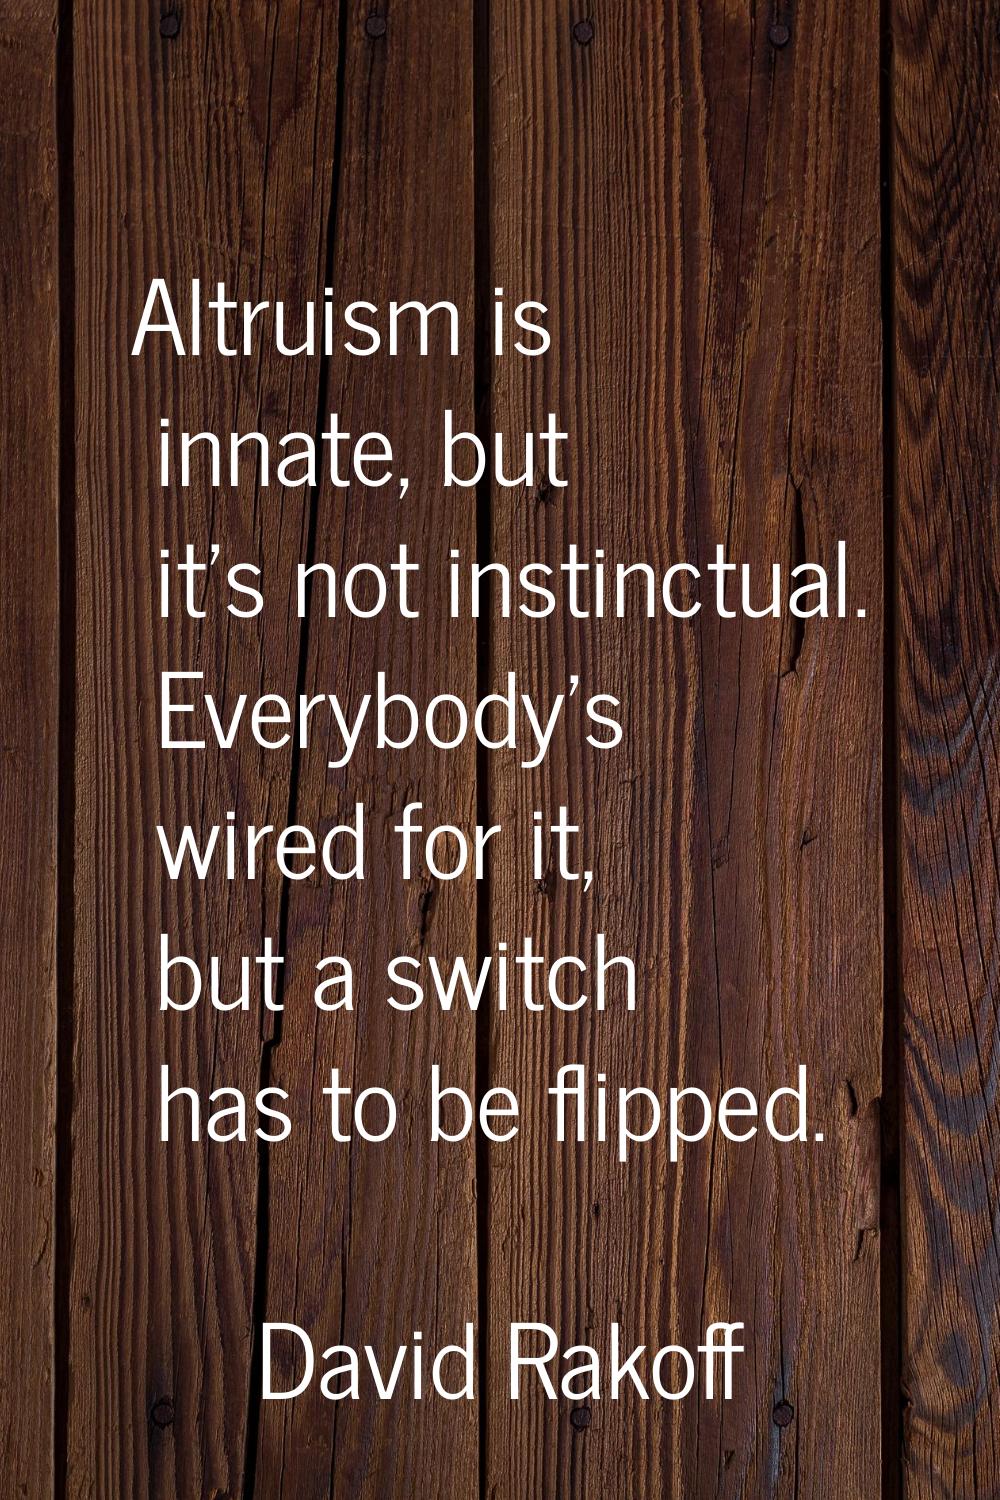 Altruism is innate, but it's not instinctual. Everybody's wired for it, but a switch has to be flip